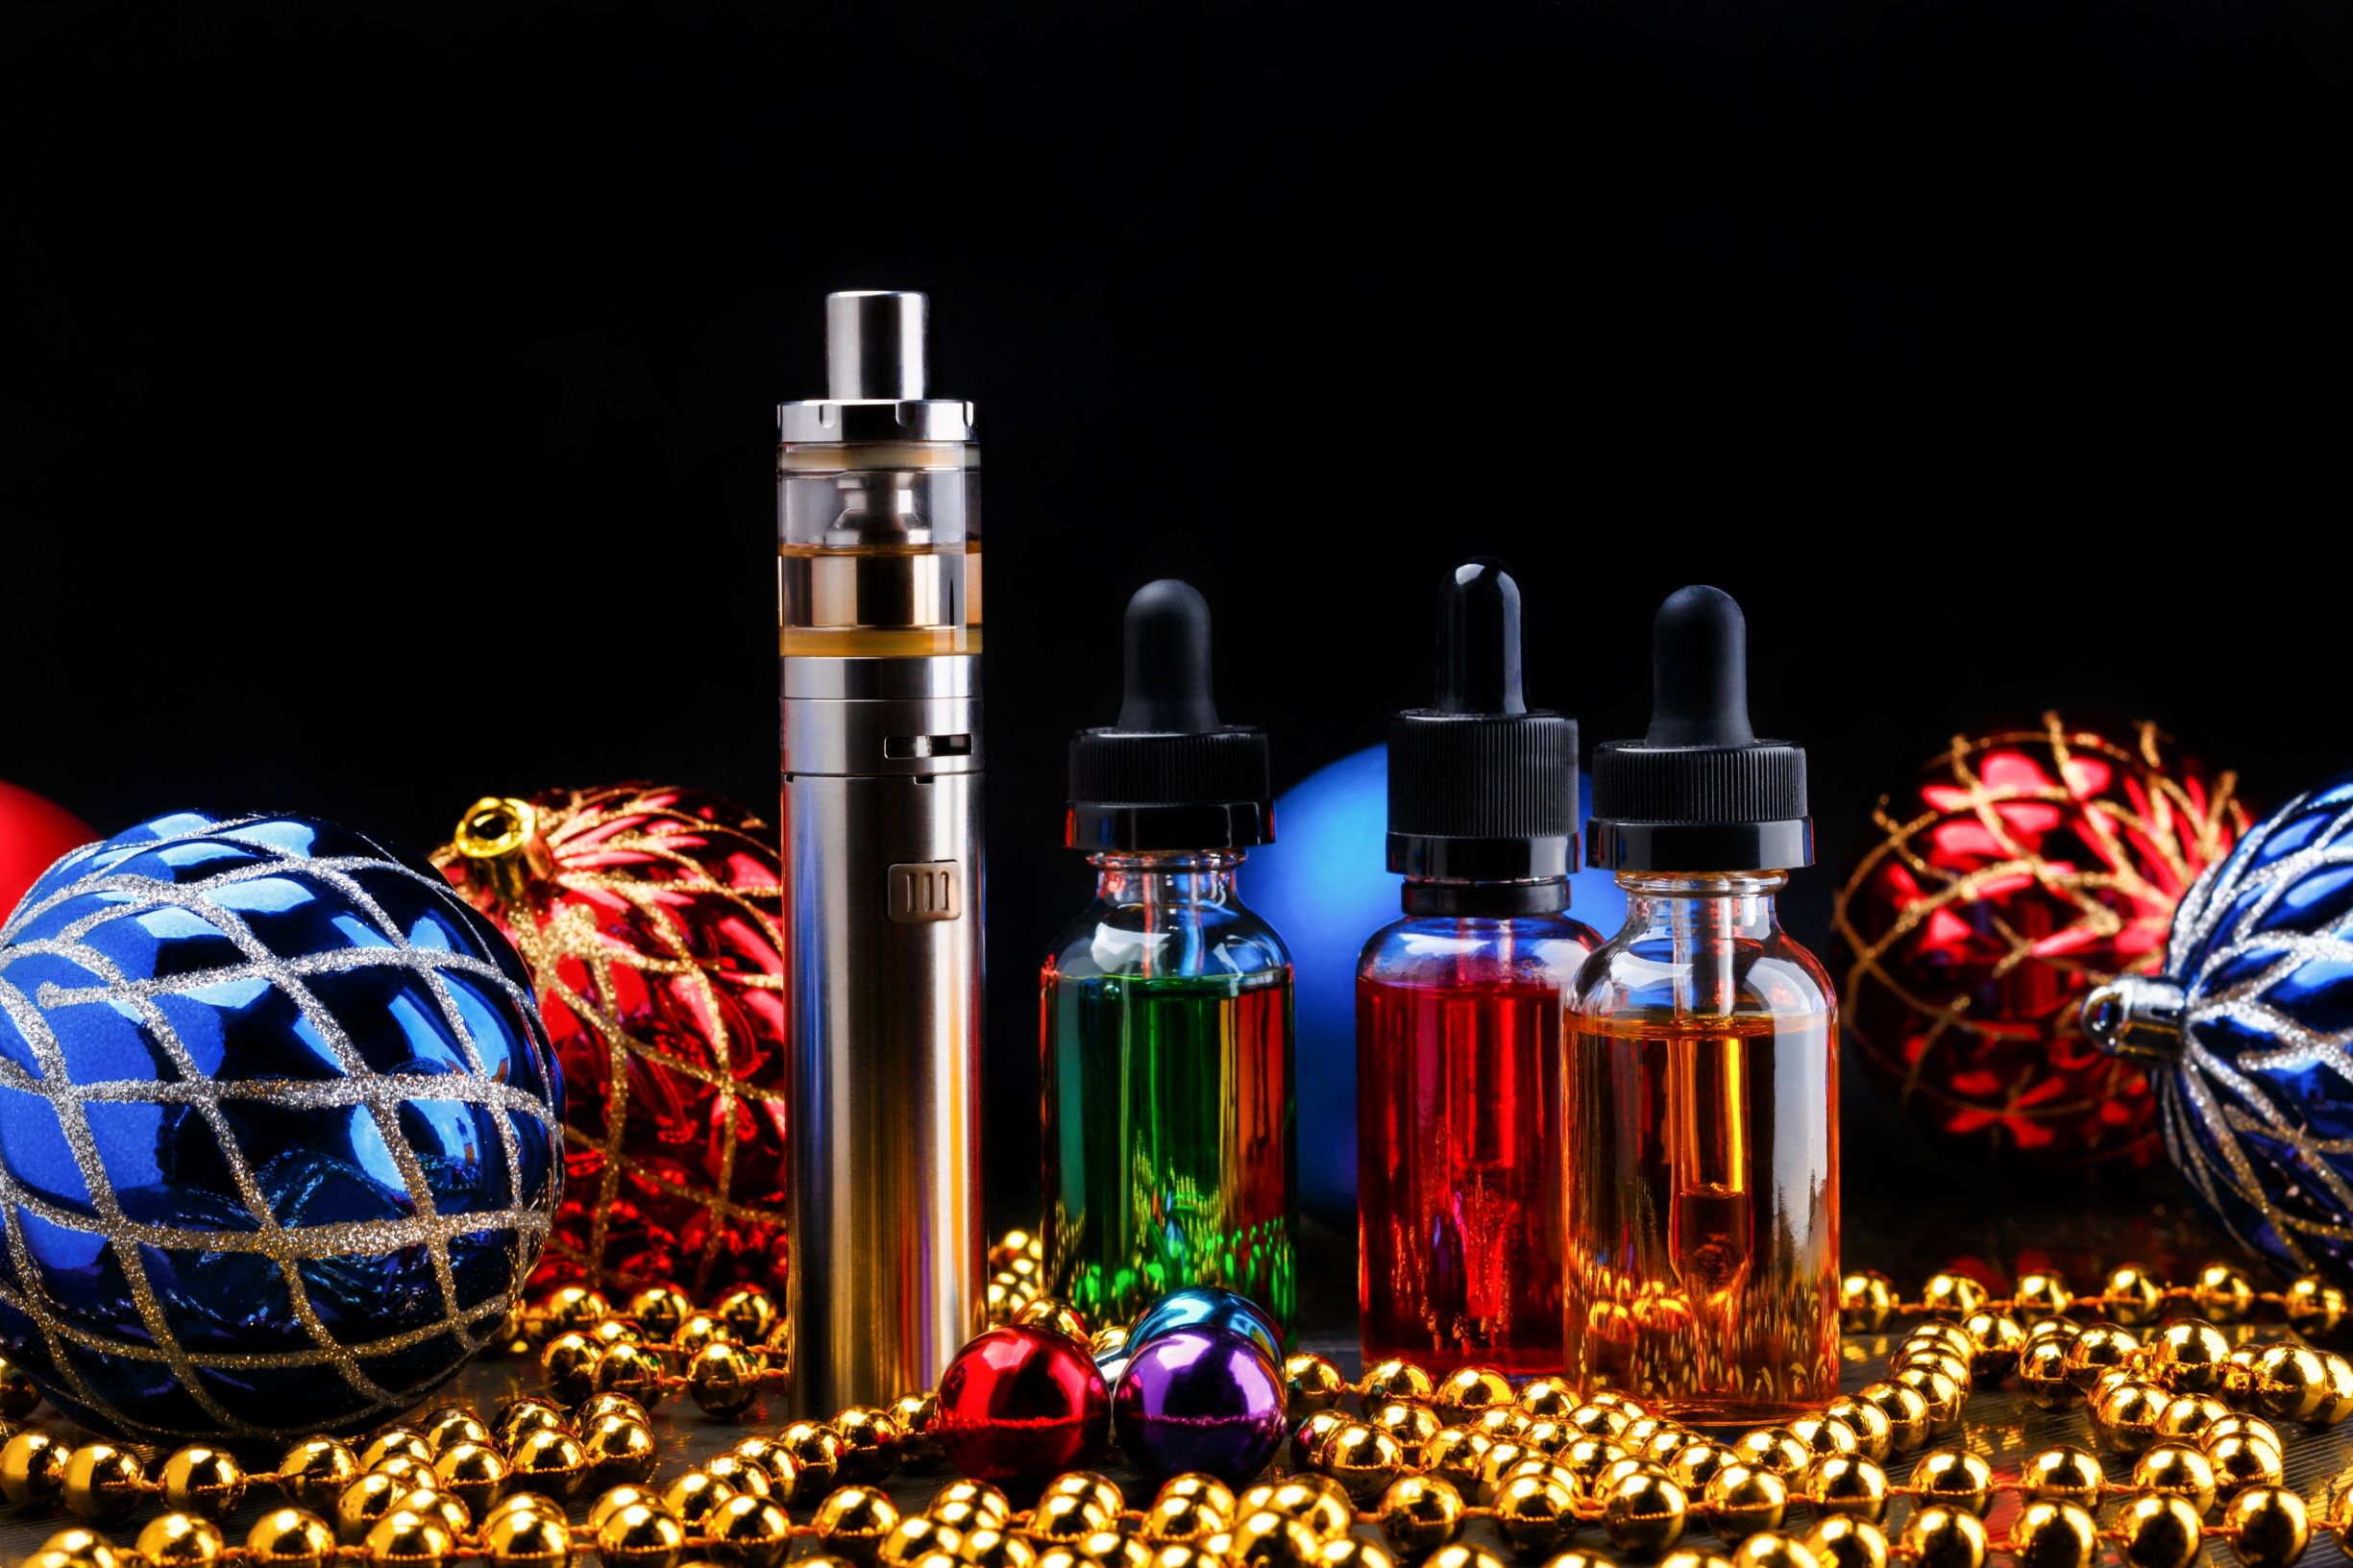 Your DC Alchemy Holiday Vape Gift Guide!